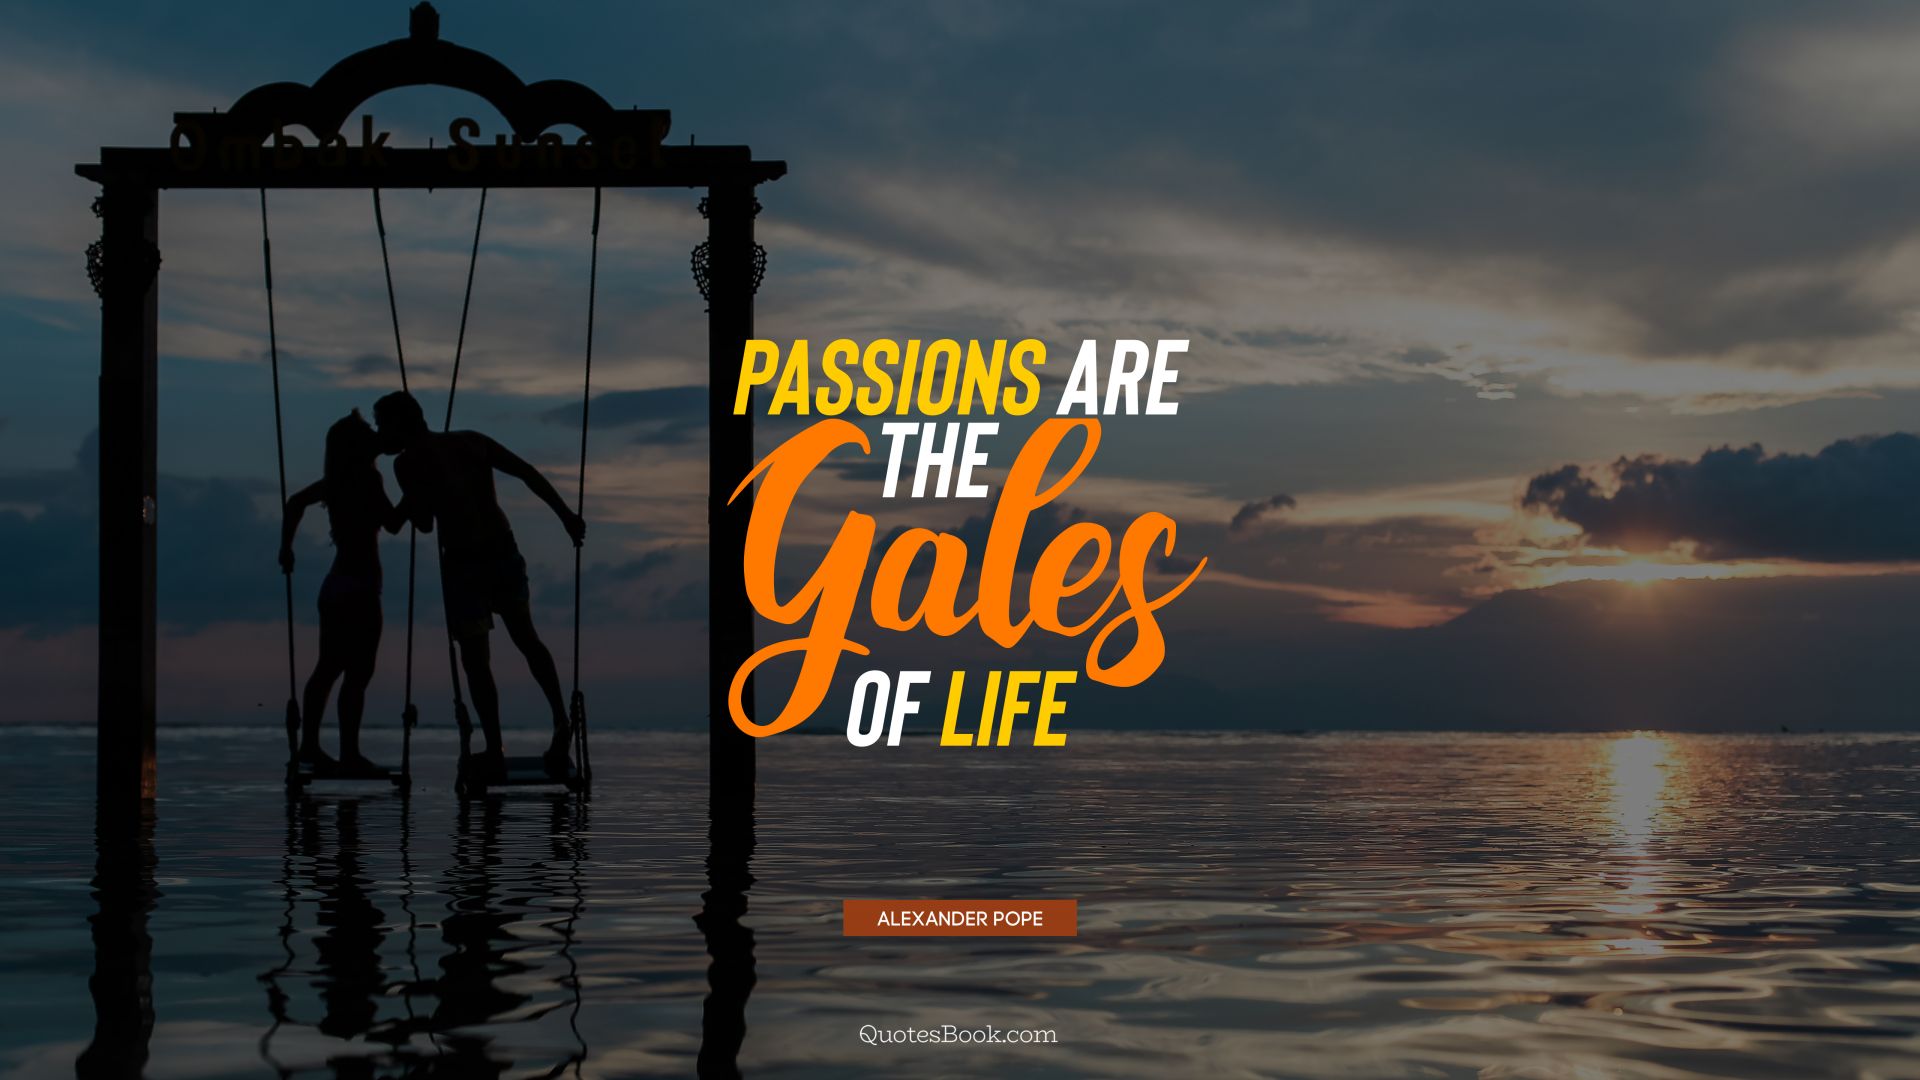 Passions are the gales of life. - Quote by Alexander Pope